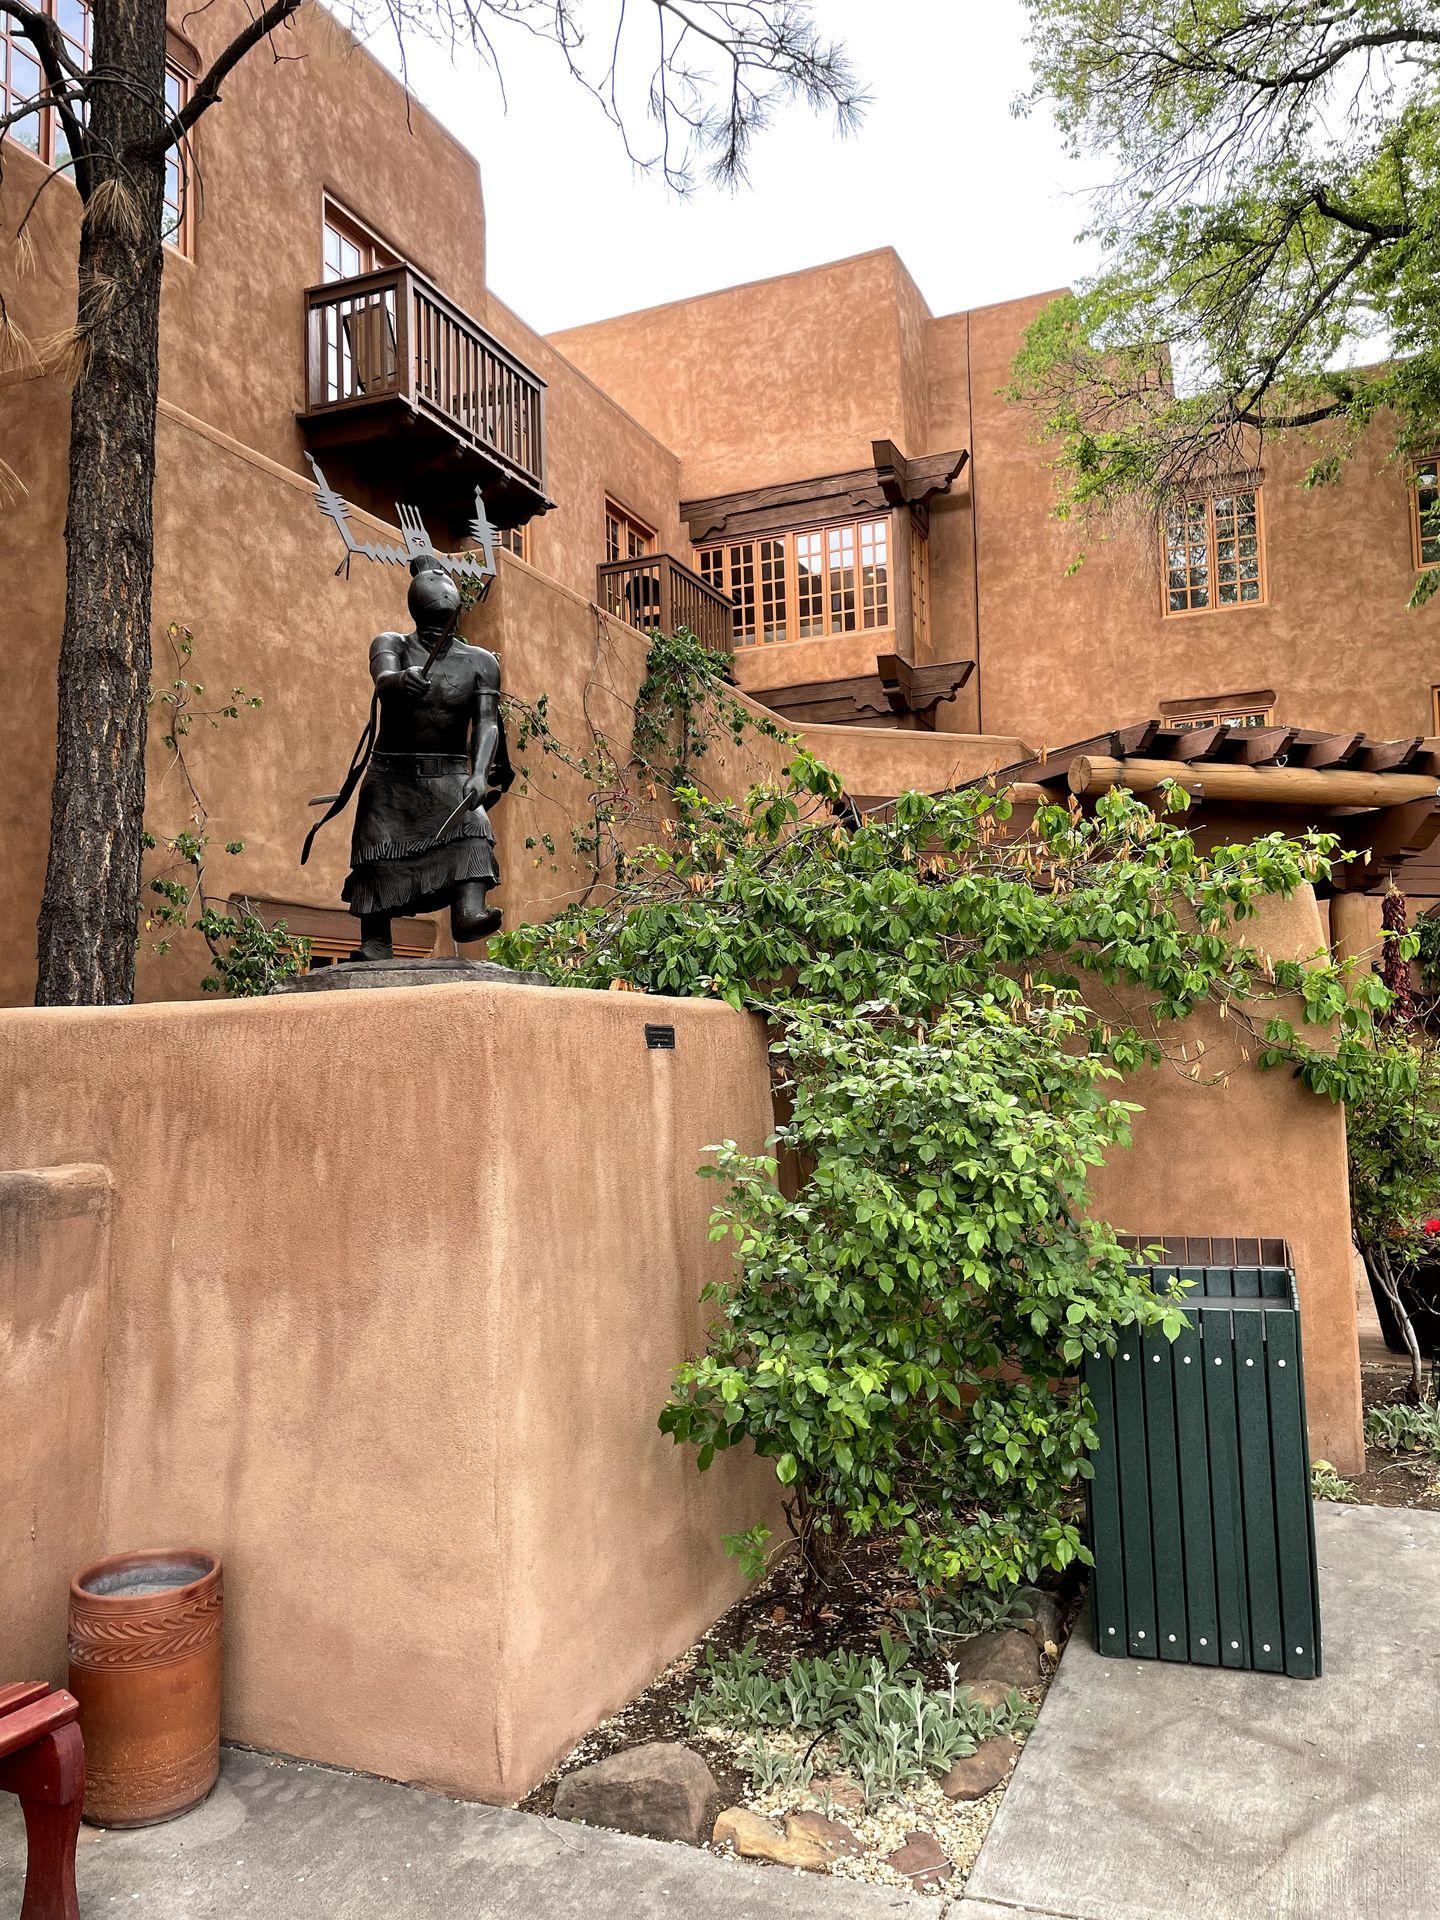 The Pueblo exterior of Hotel Santa Fe. There is a statue mixed in with the landscaping.